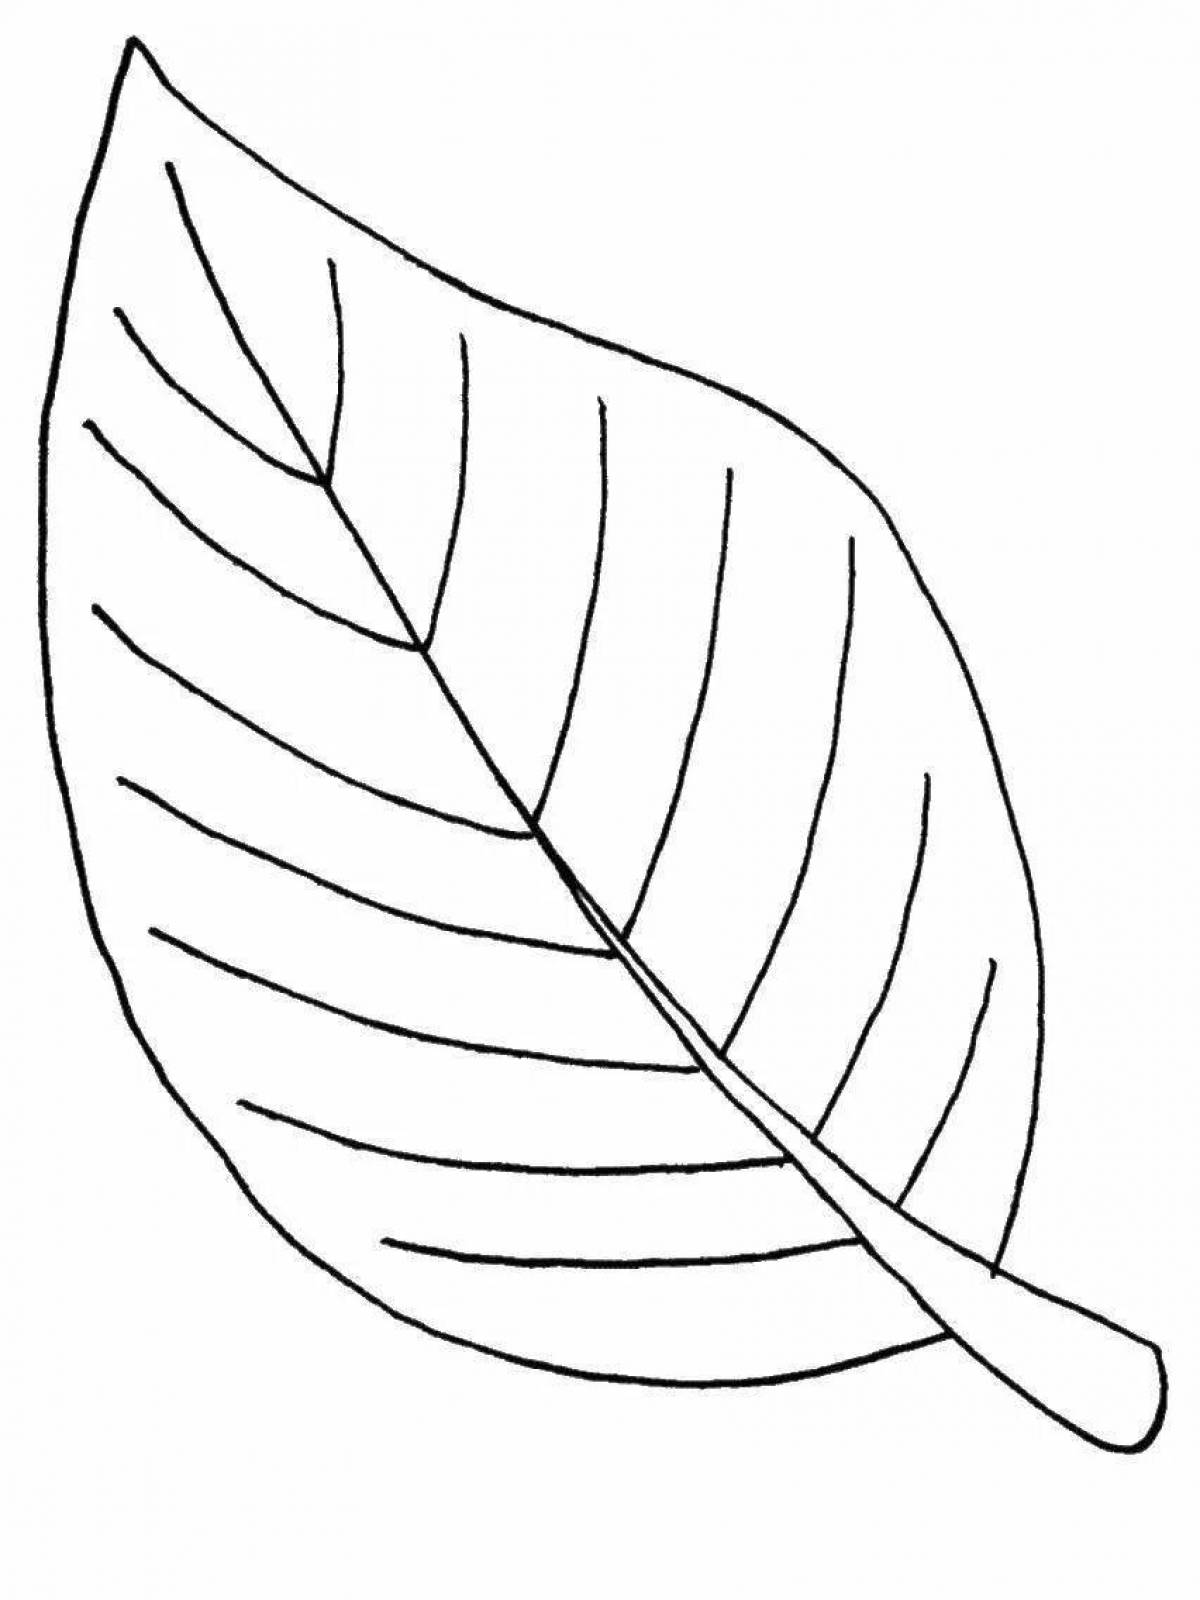 Coloring for bright leaves for children